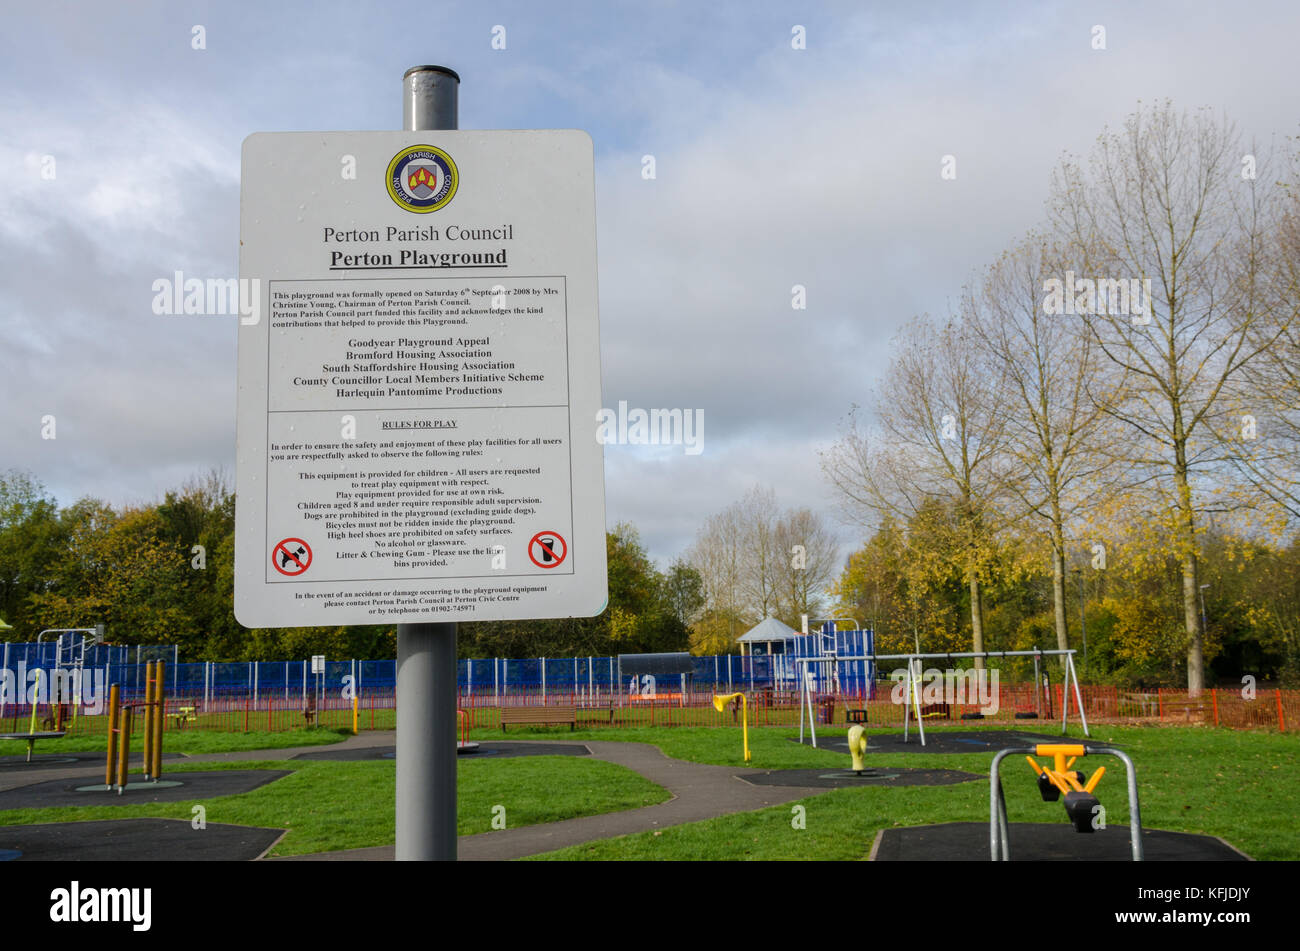 A sign at Perton Playground with rules and information. Perton is a village in South Staffordshire near Wolverhampton in the UK. Stock Photo